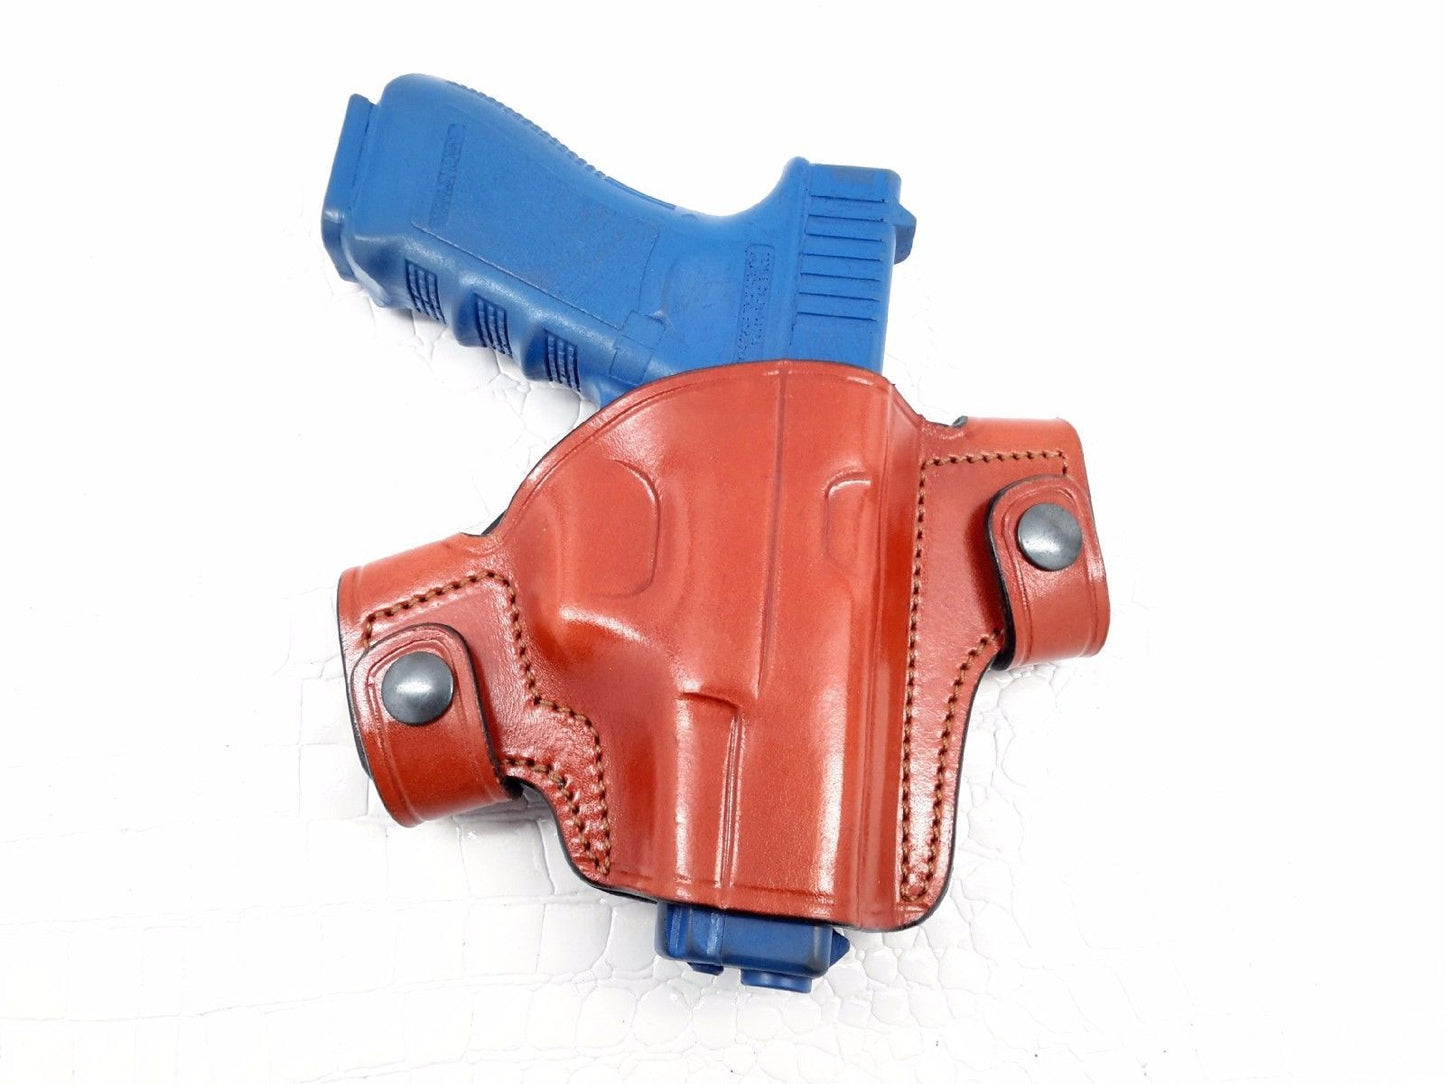 Glock 17 Snap-on Right Hand Leather Holster - Choose your Style